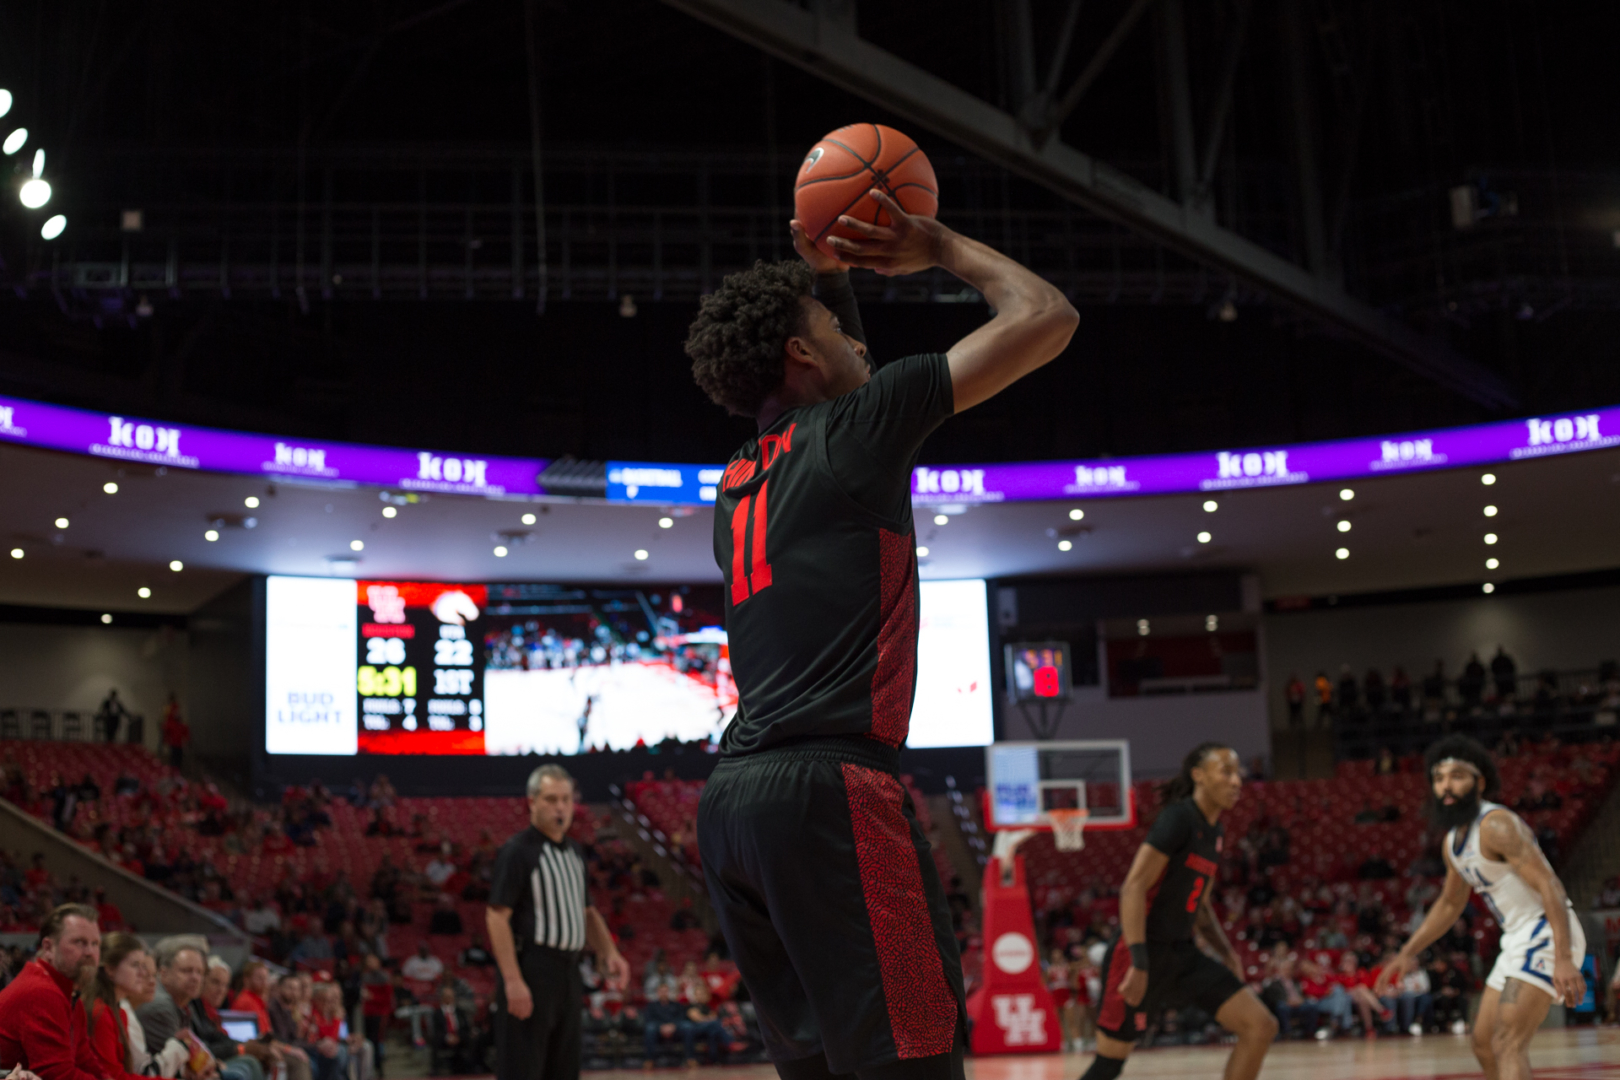 Sophomore guard Nate Hinton scored 17 and pulled down 10 rebounds in the Cougars' 77-57 rout of the UTEP Miners on Thursday night at Fertitta Center. | Trevor Nolley/The Cougar